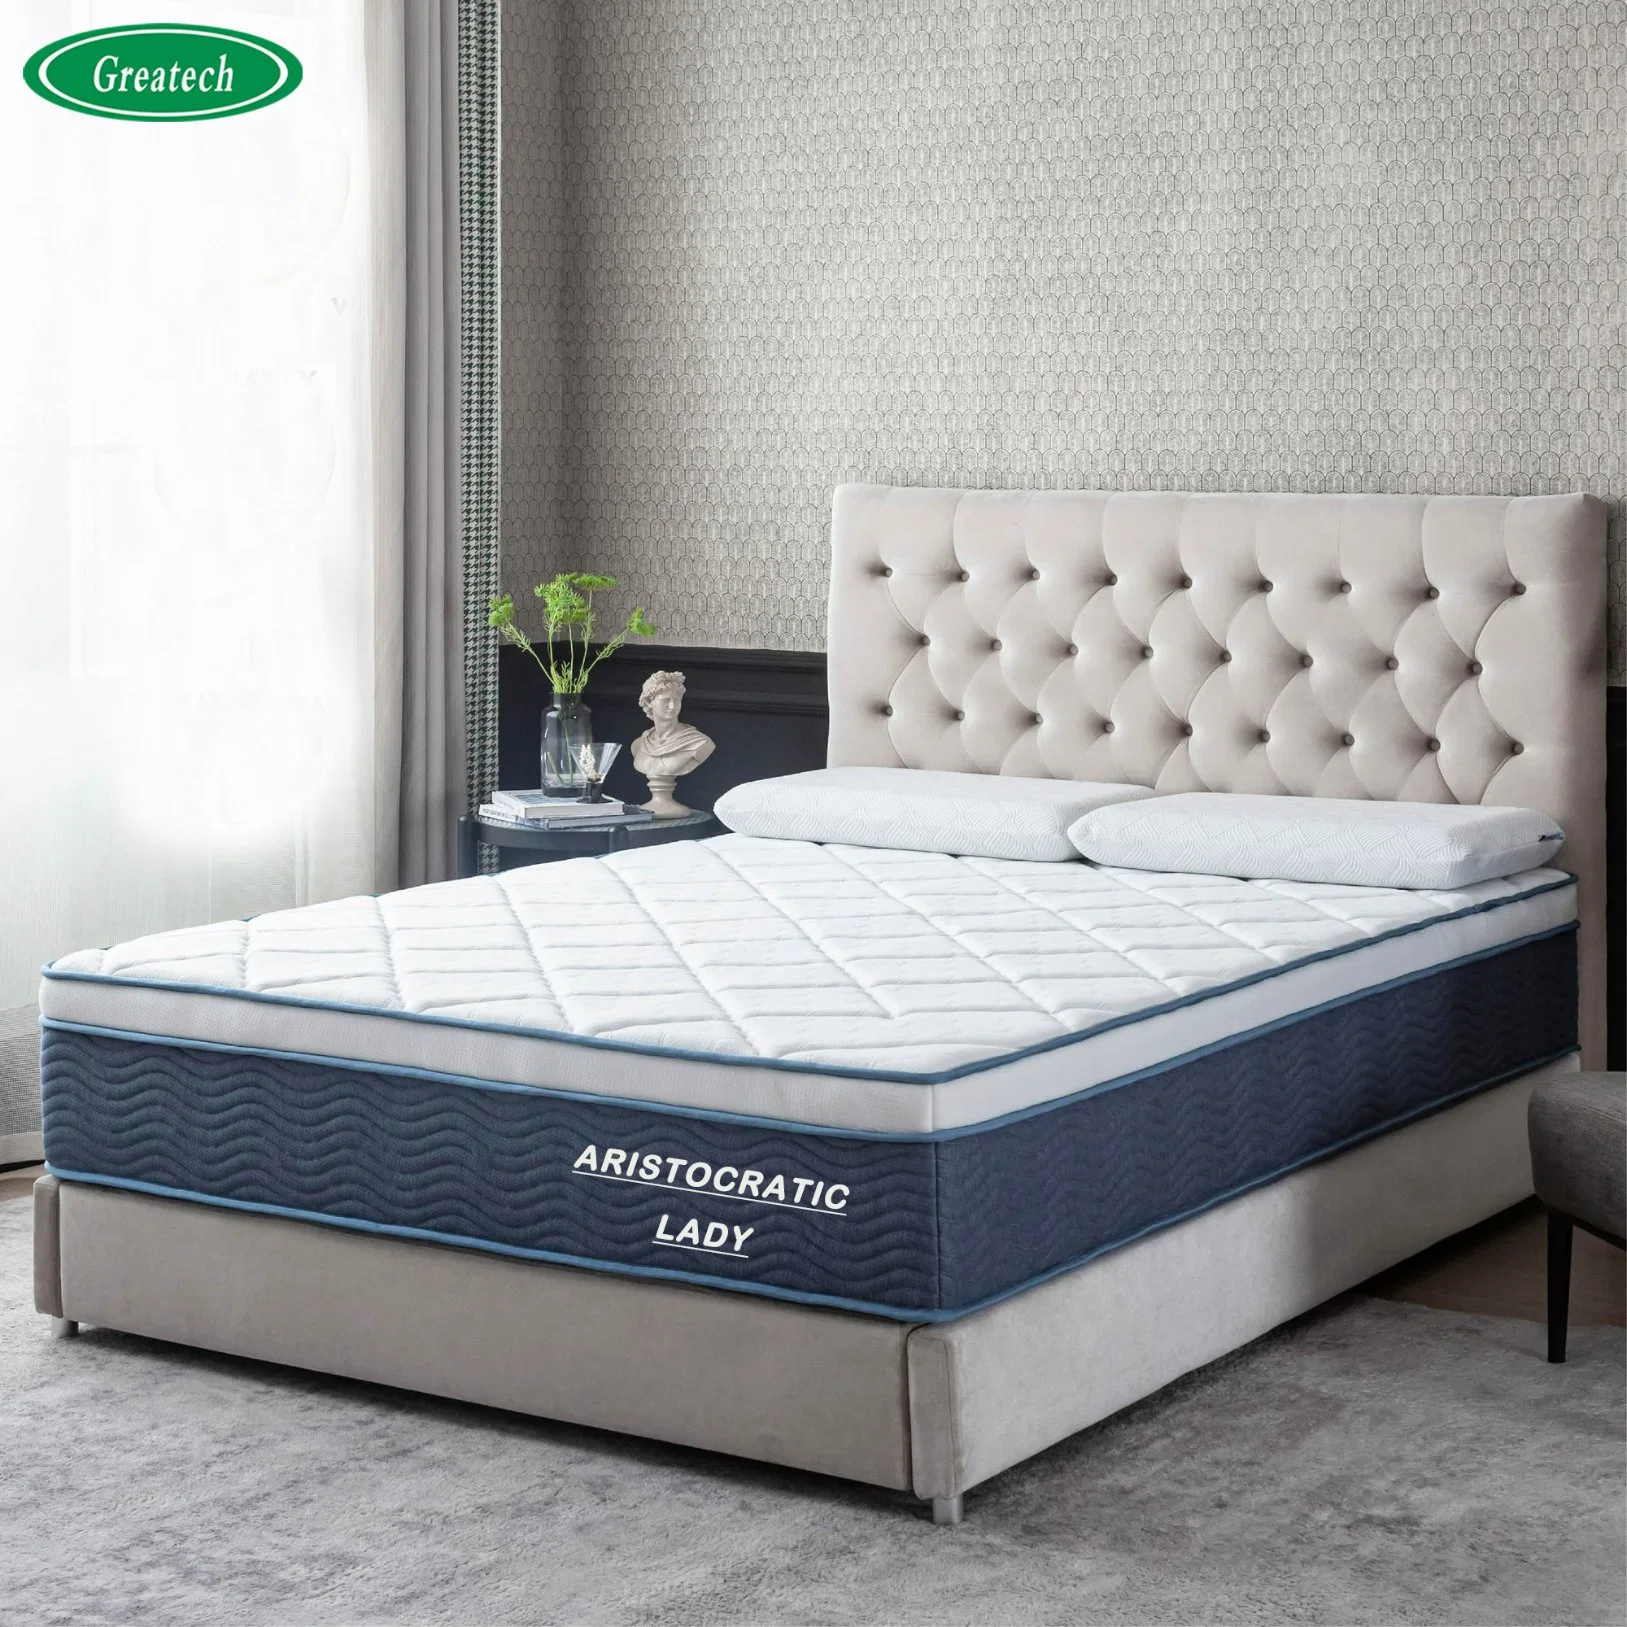 Full Size China Wholesale Cheap Bed Mattress Living Room Furnture Bedroom Furniture Cotton Bamboo Fabric Vacuum Packing Spring Mattress in a Box